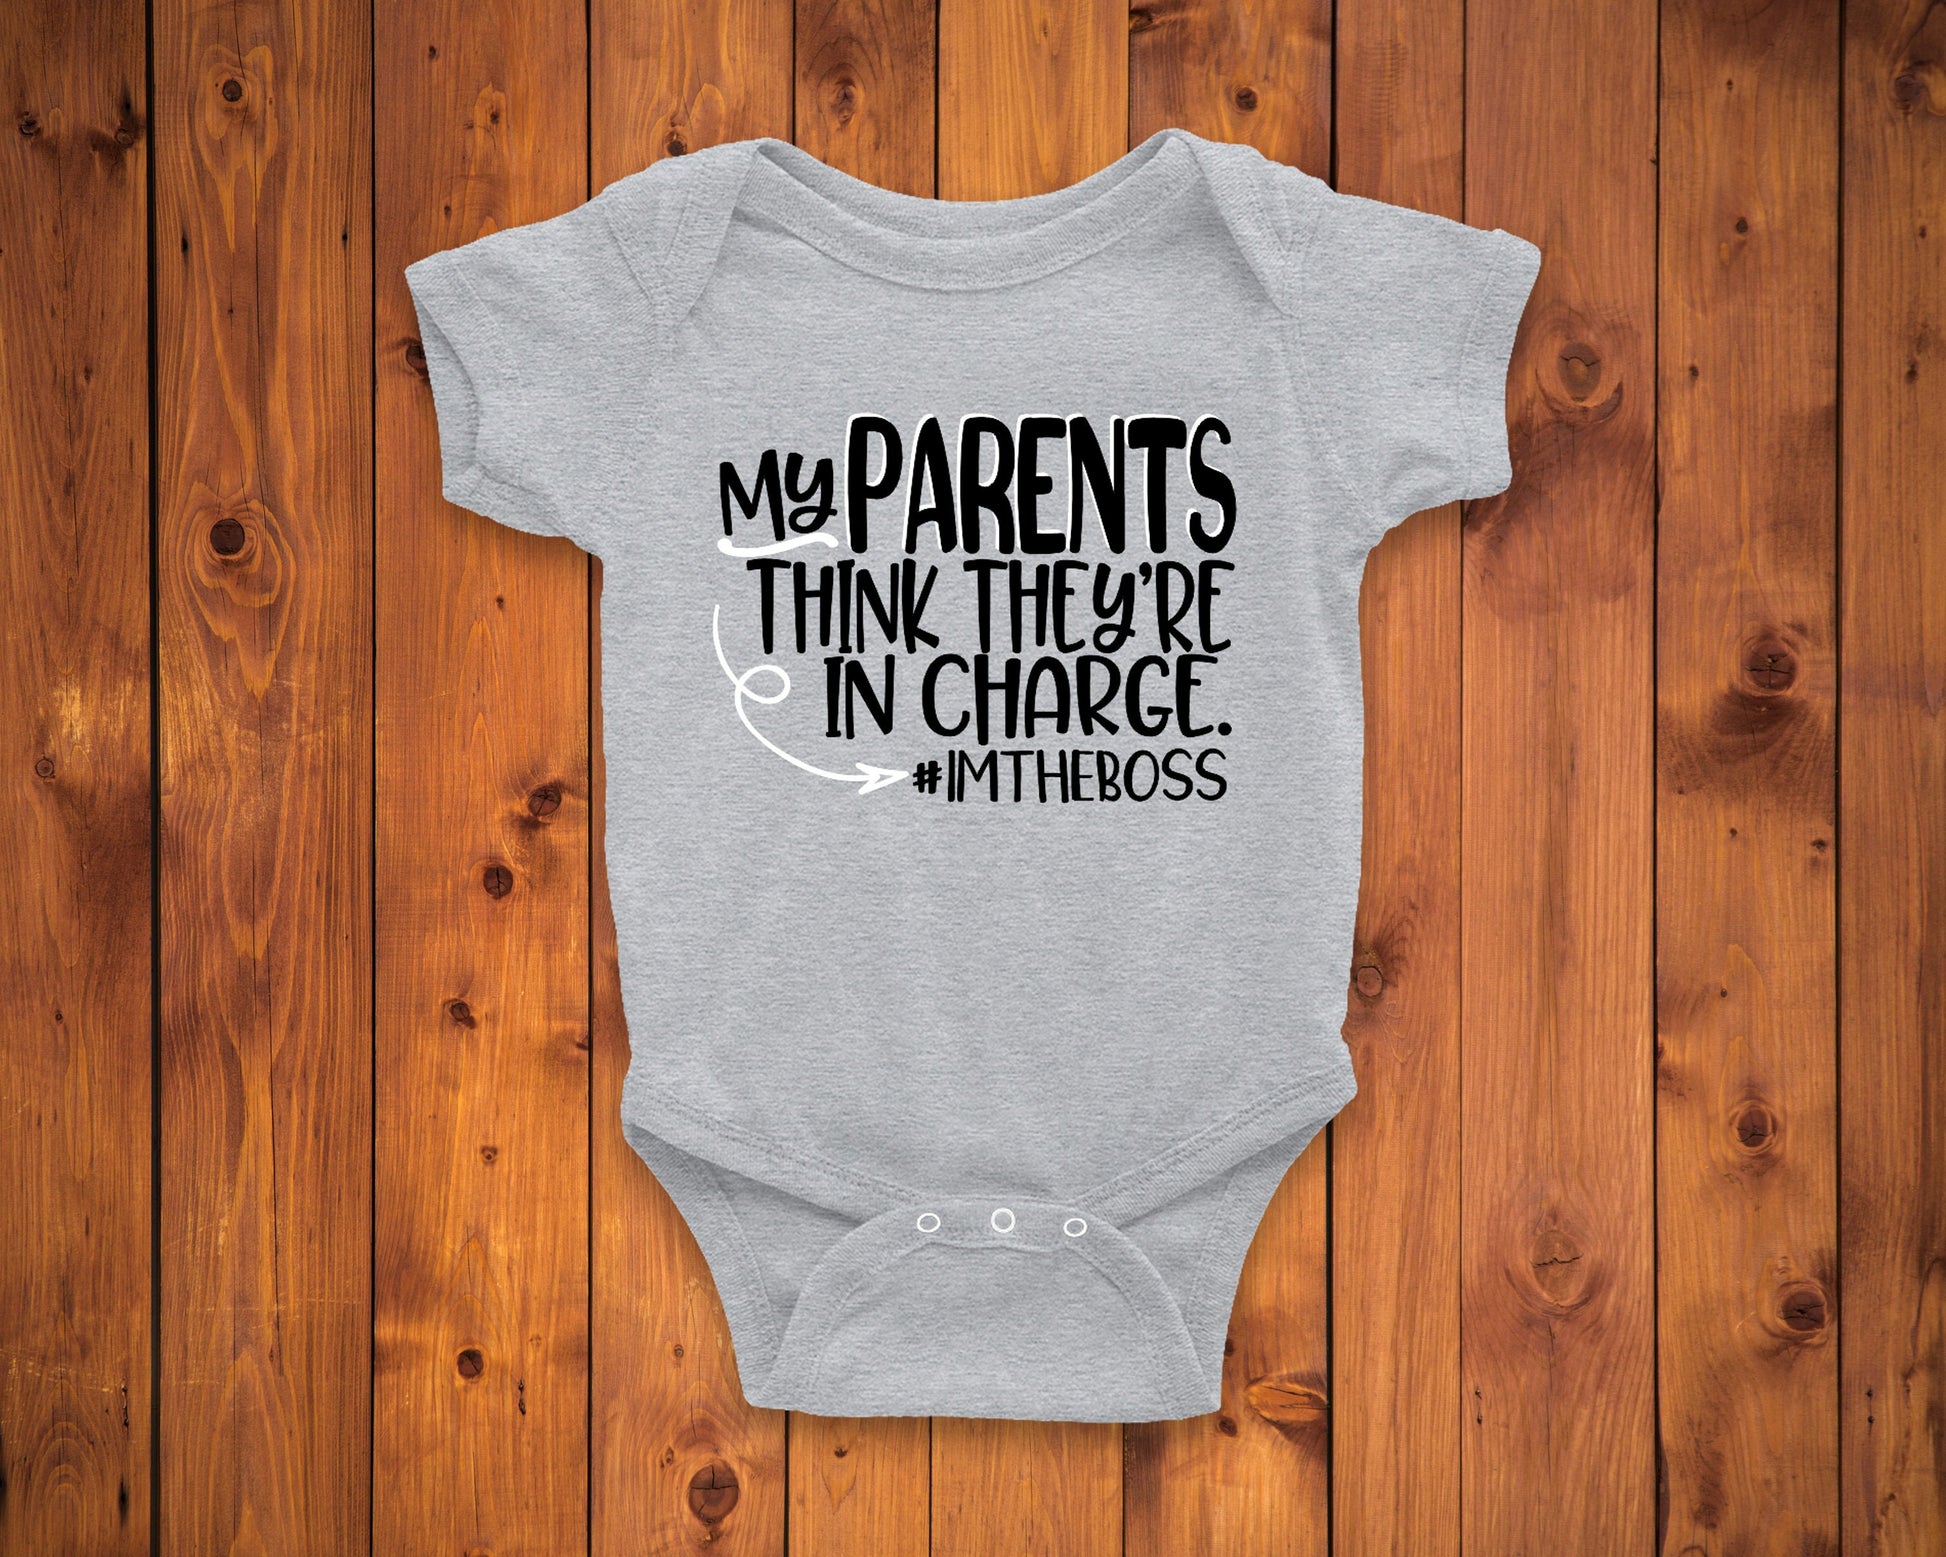 My Parents Think They're In Charge Infant or Youth Shirt or Bodysuit - Funny Baby Bodysuit - Funny Toddler Shirt - Gift for Baby